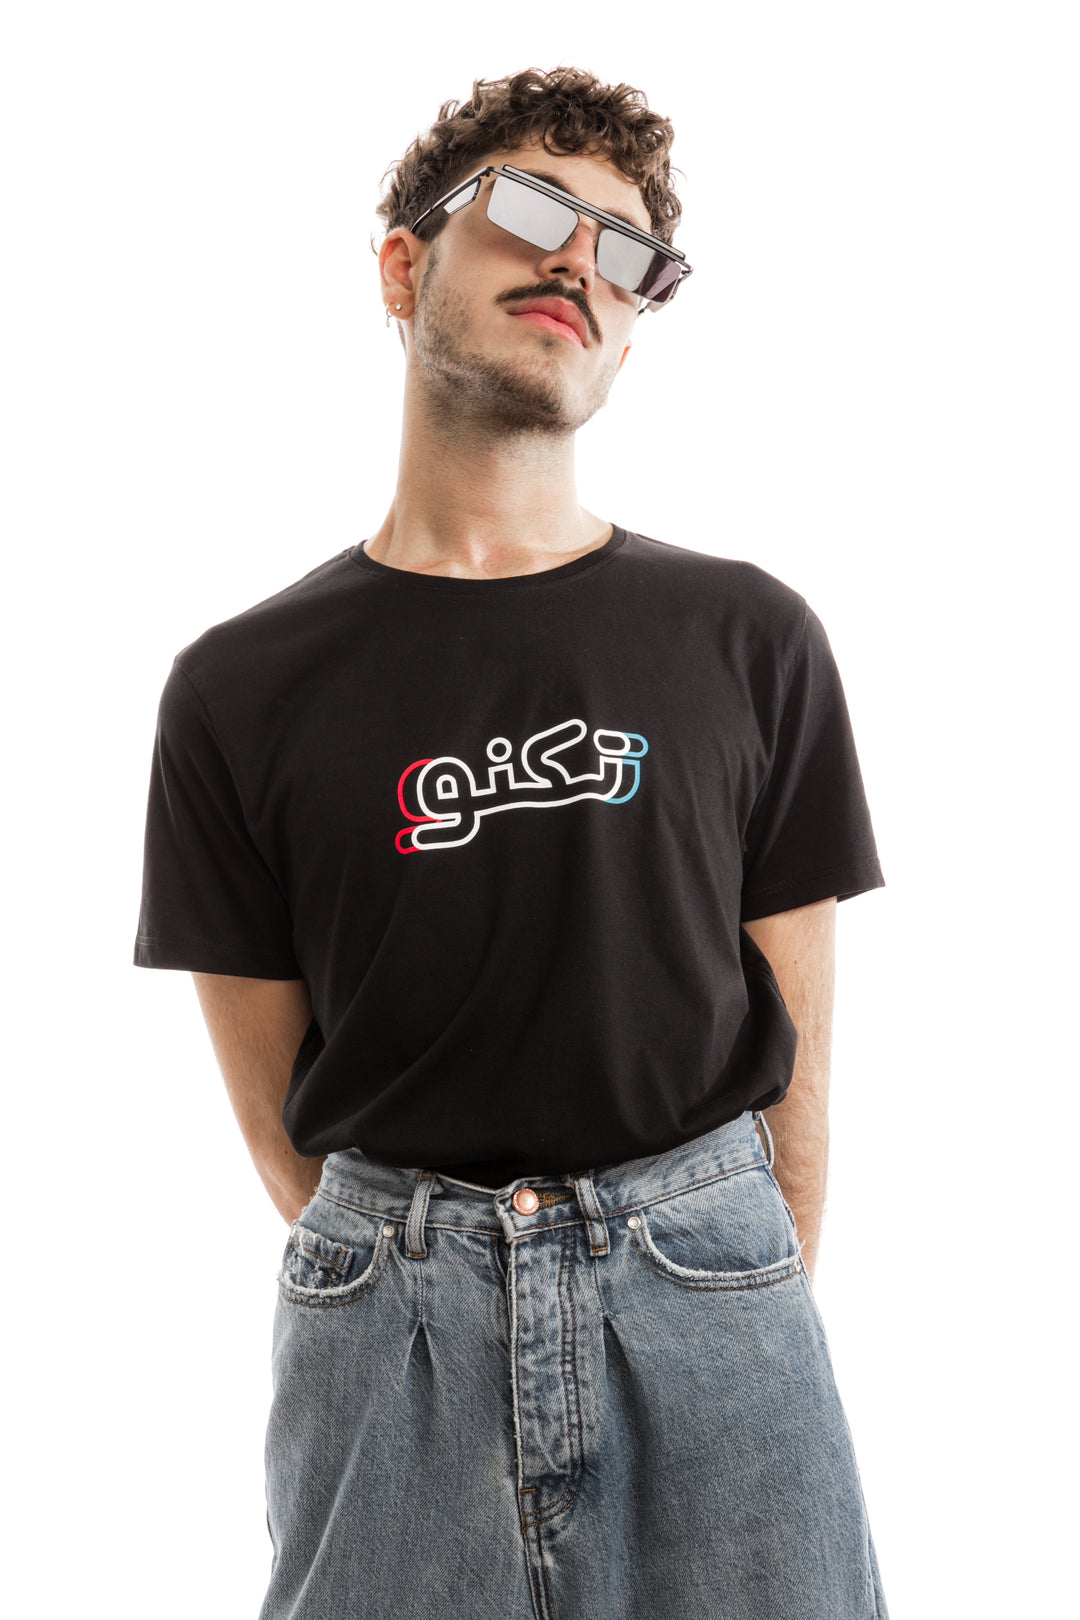 young adult male wearing black t-shirt with techno written in arabic تكنو and in blue, red and white in the center of the t-shirt along with blue jeans and sunglasses